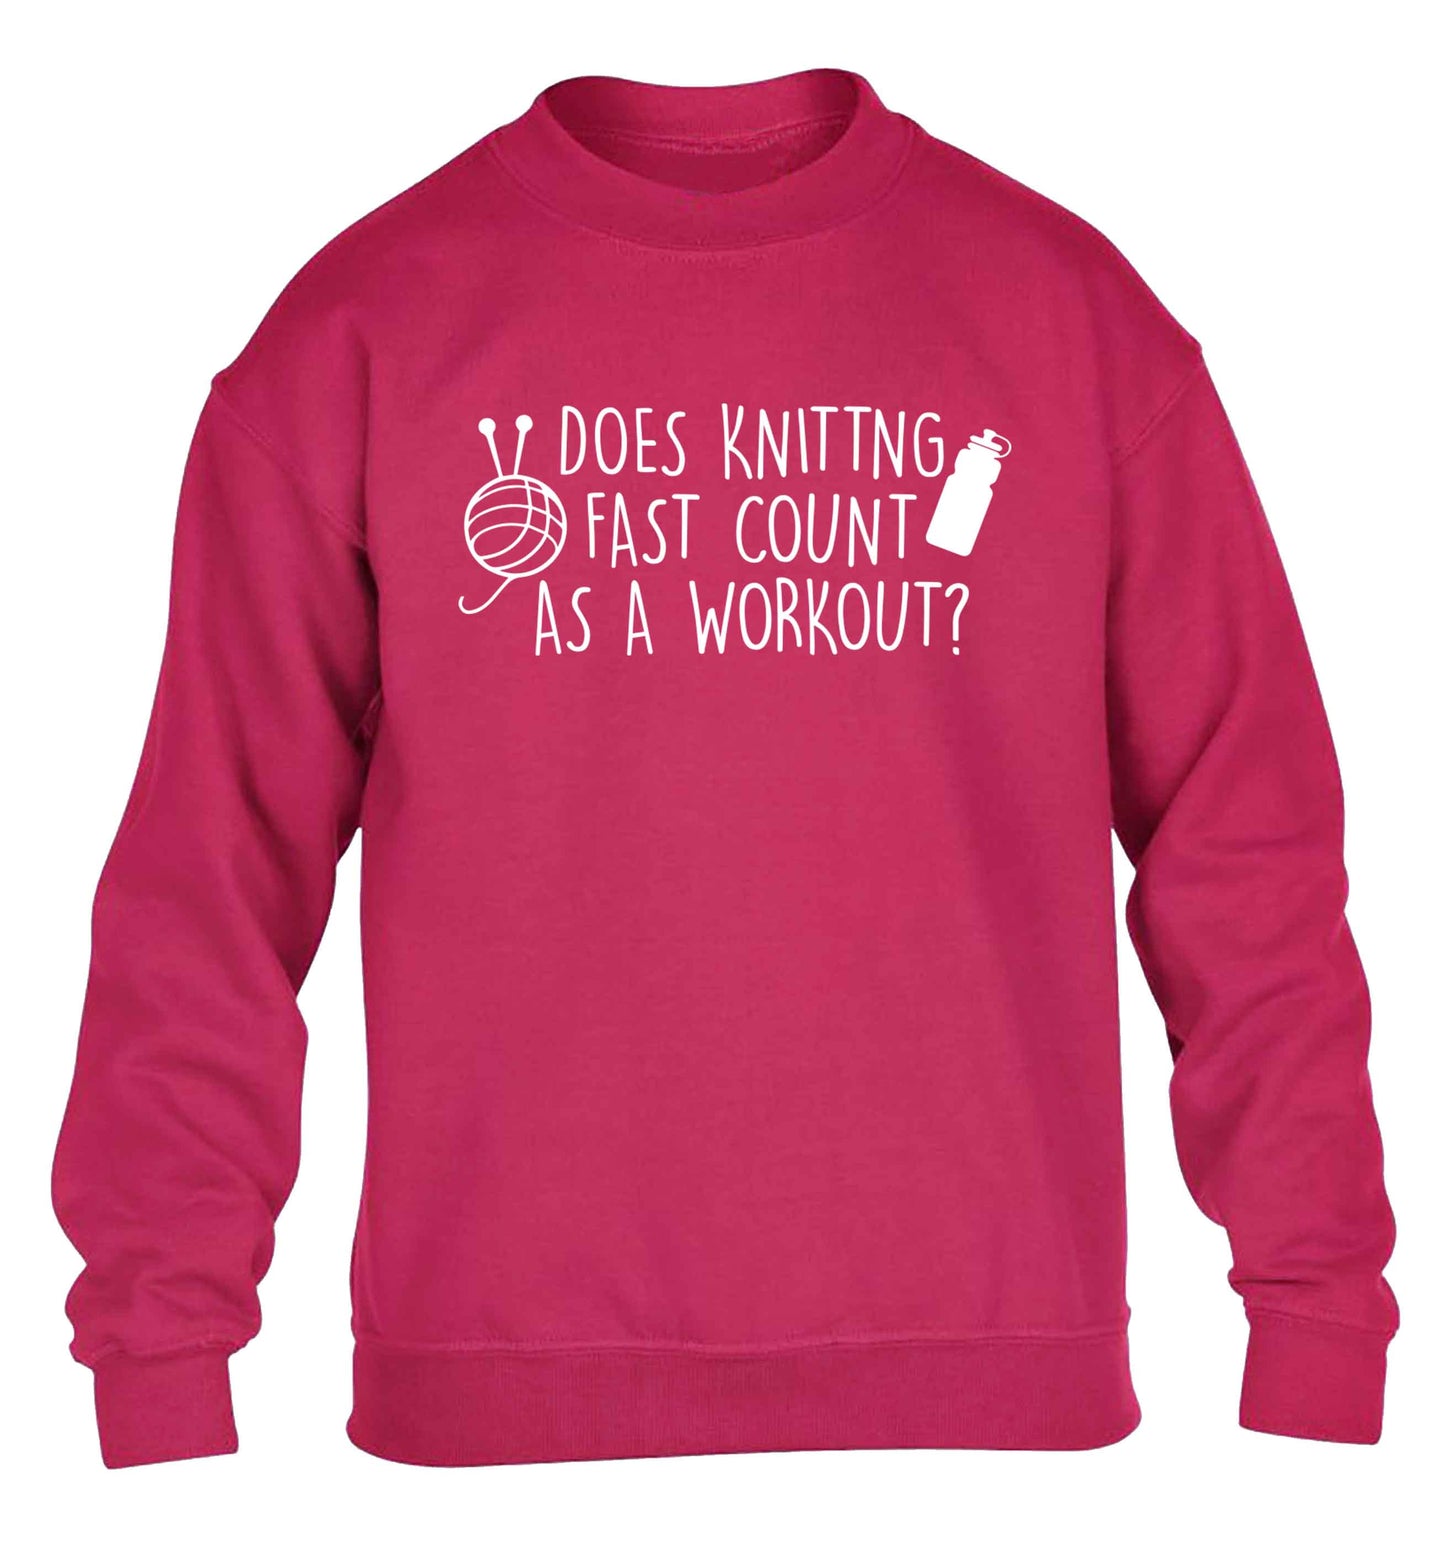 Does knitting fast count as a workout? children's pink sweater 12-13 Years